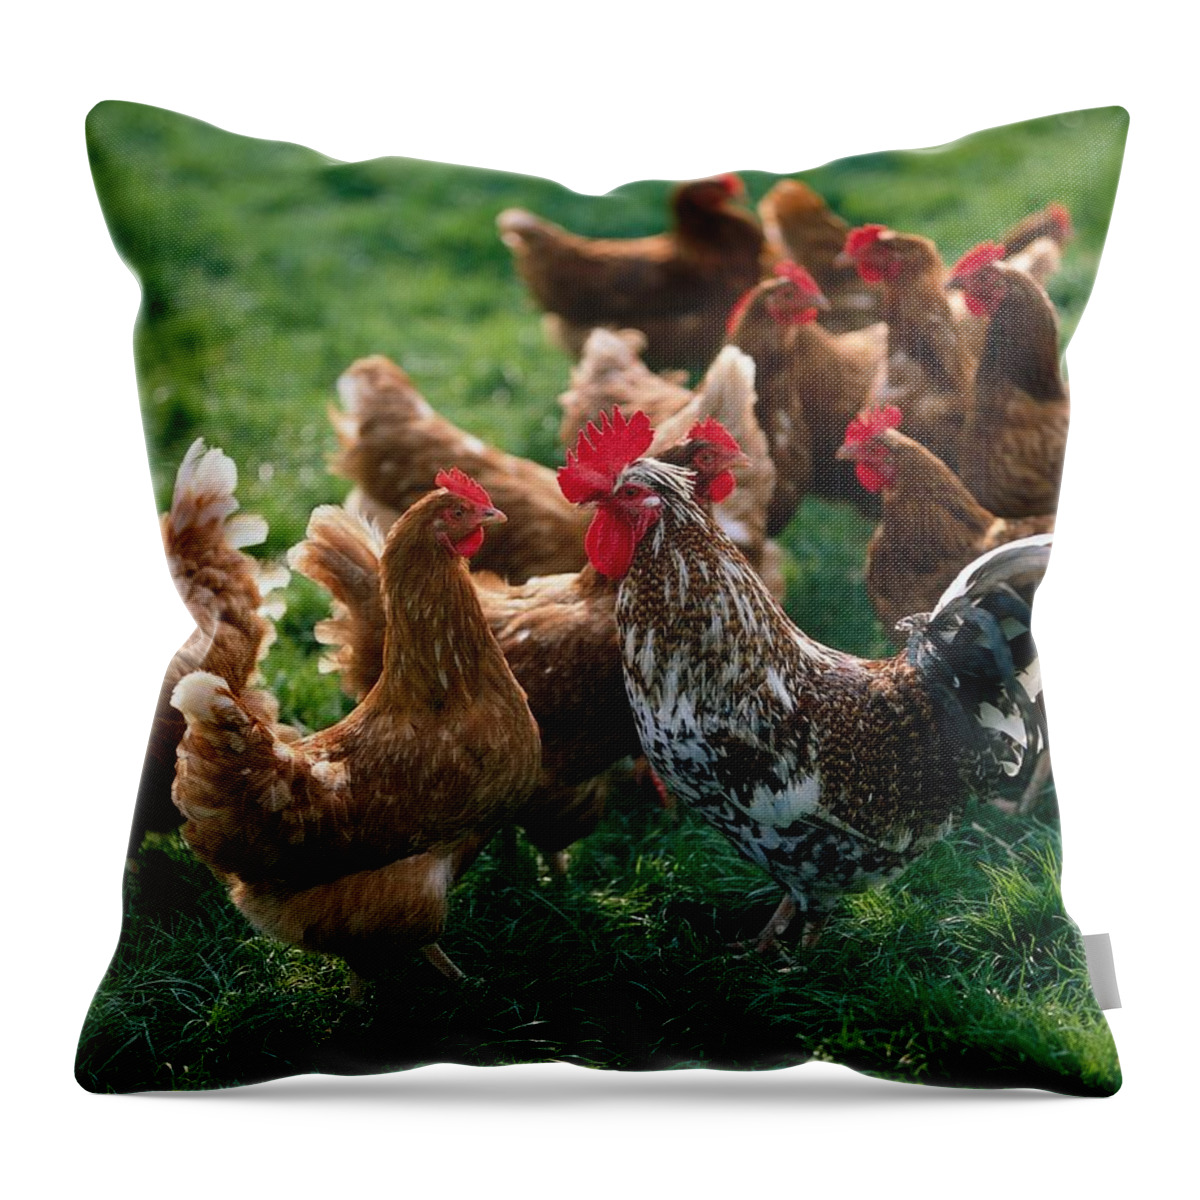 Estock Throw Pillow featuring the digital art Cock And Chickens by Reinhard Schmid